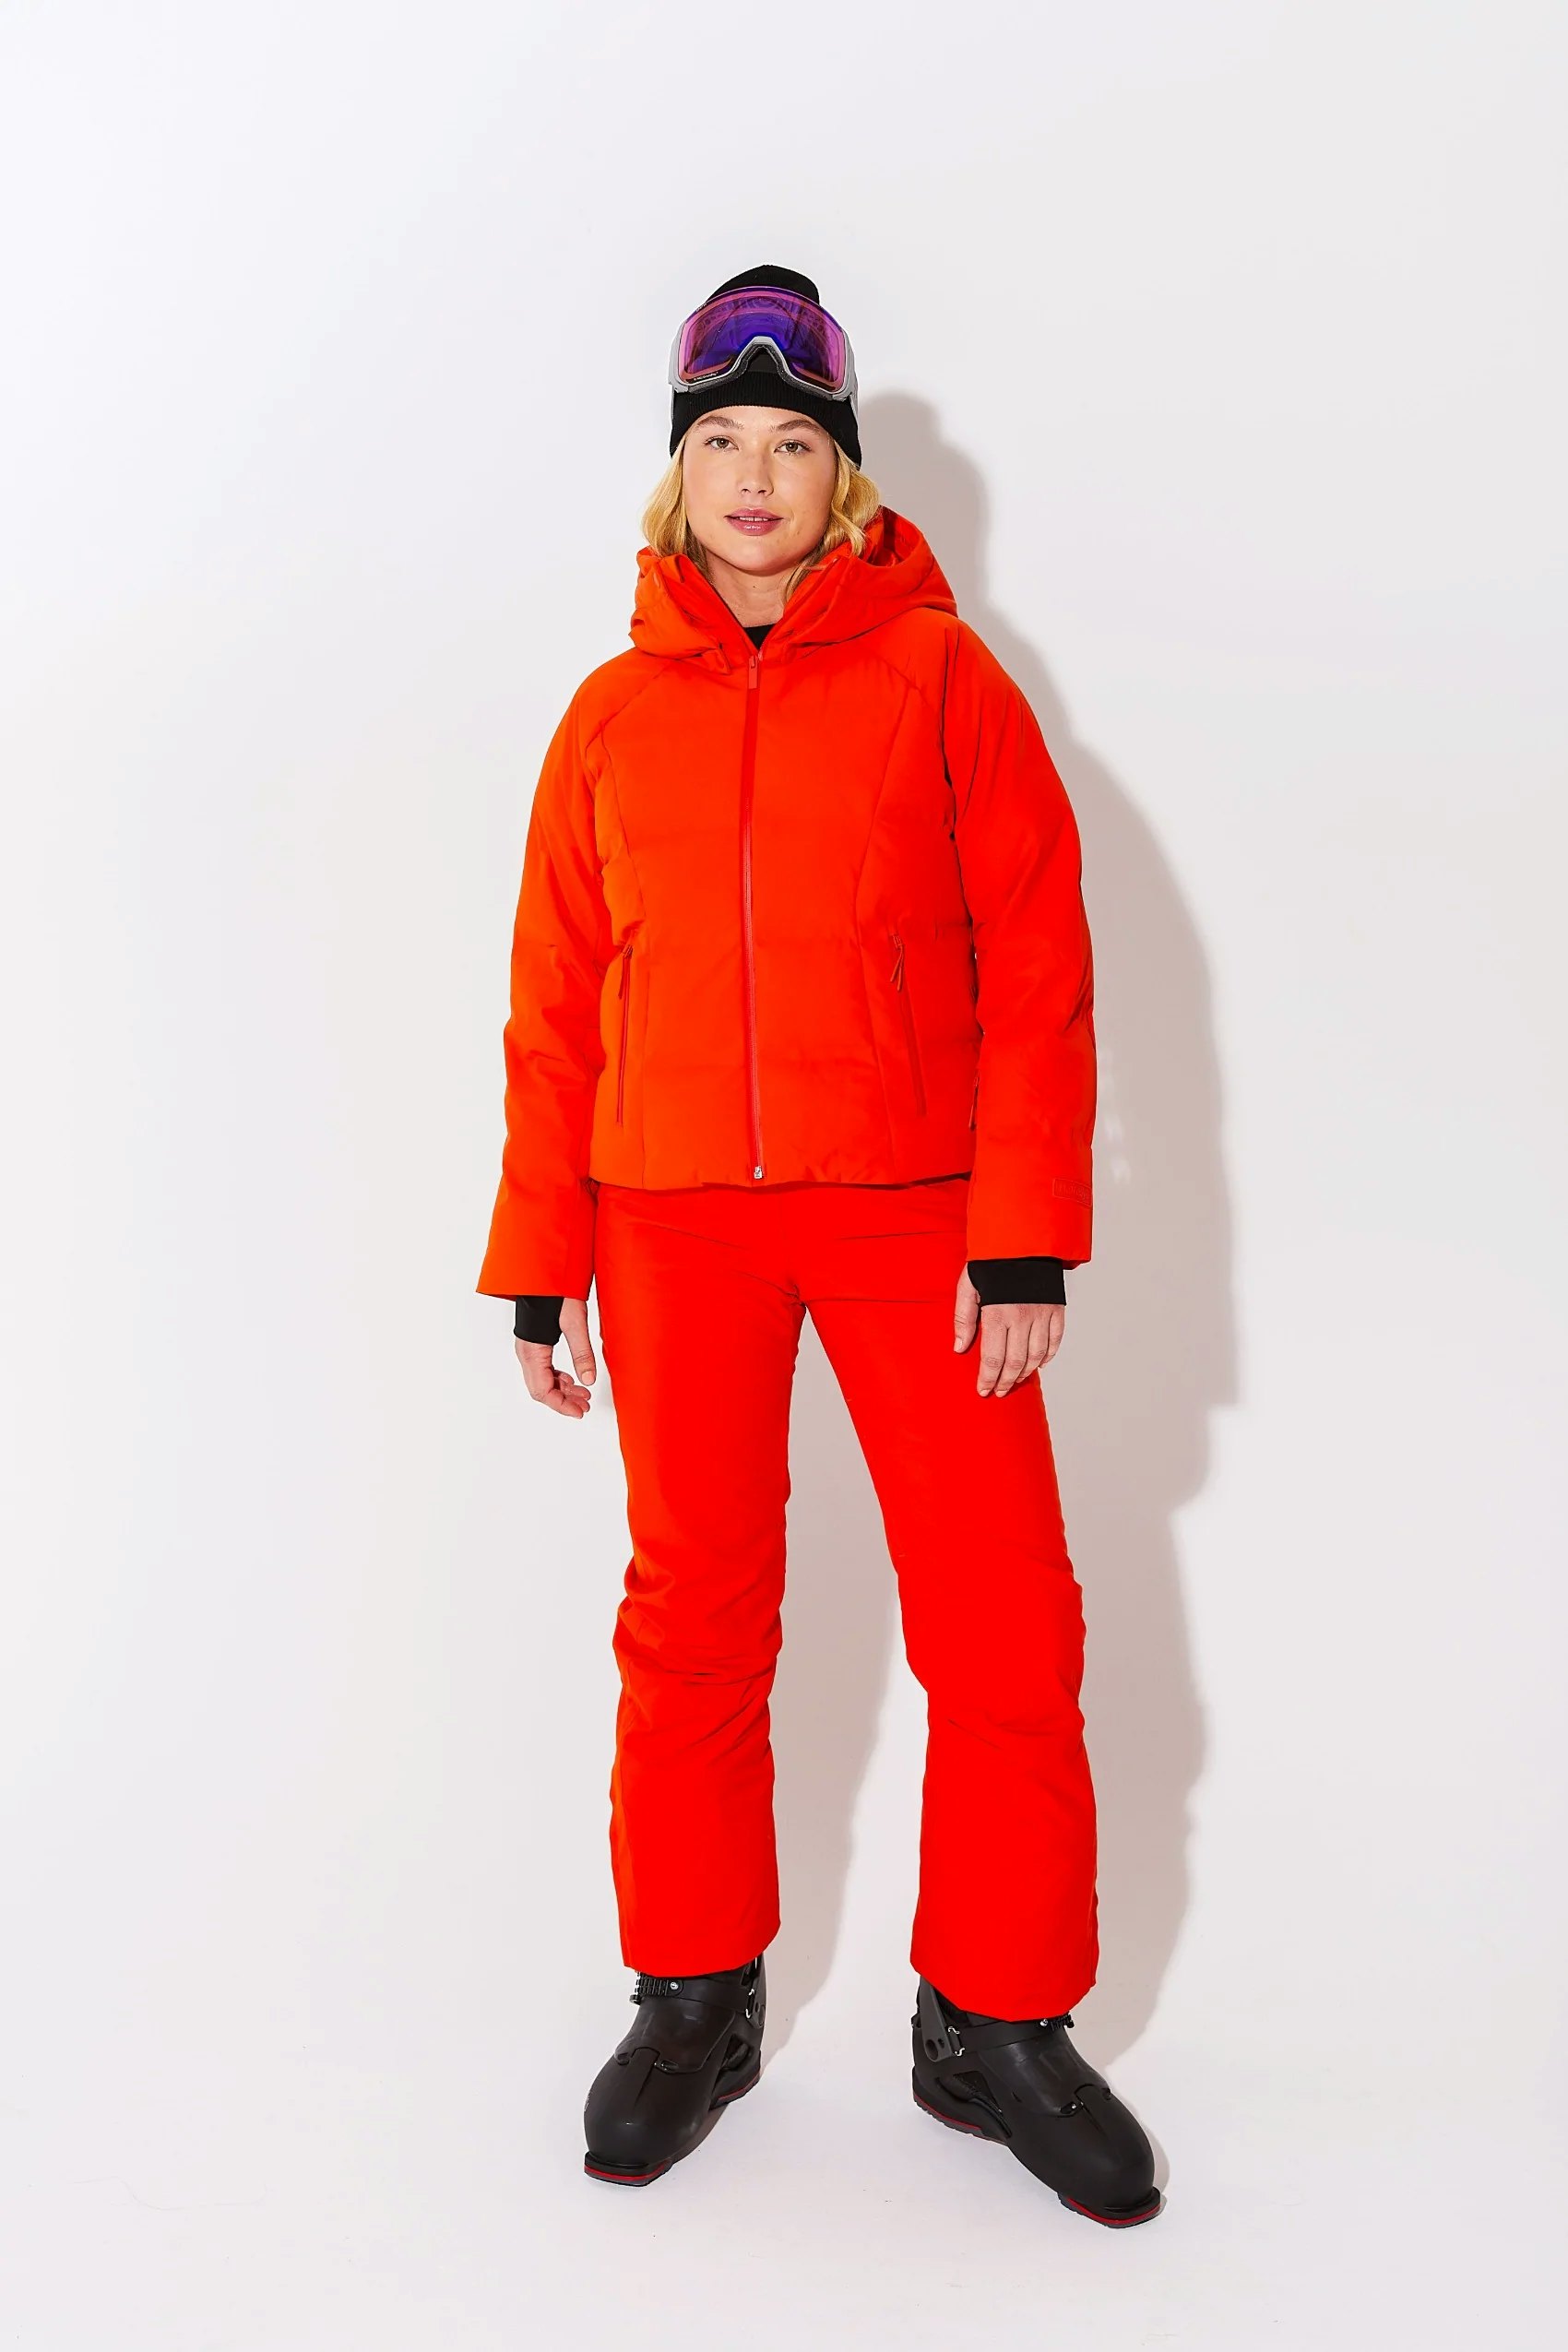 These Cute Ski Outfits Are My Go-To On & Off The Slopes